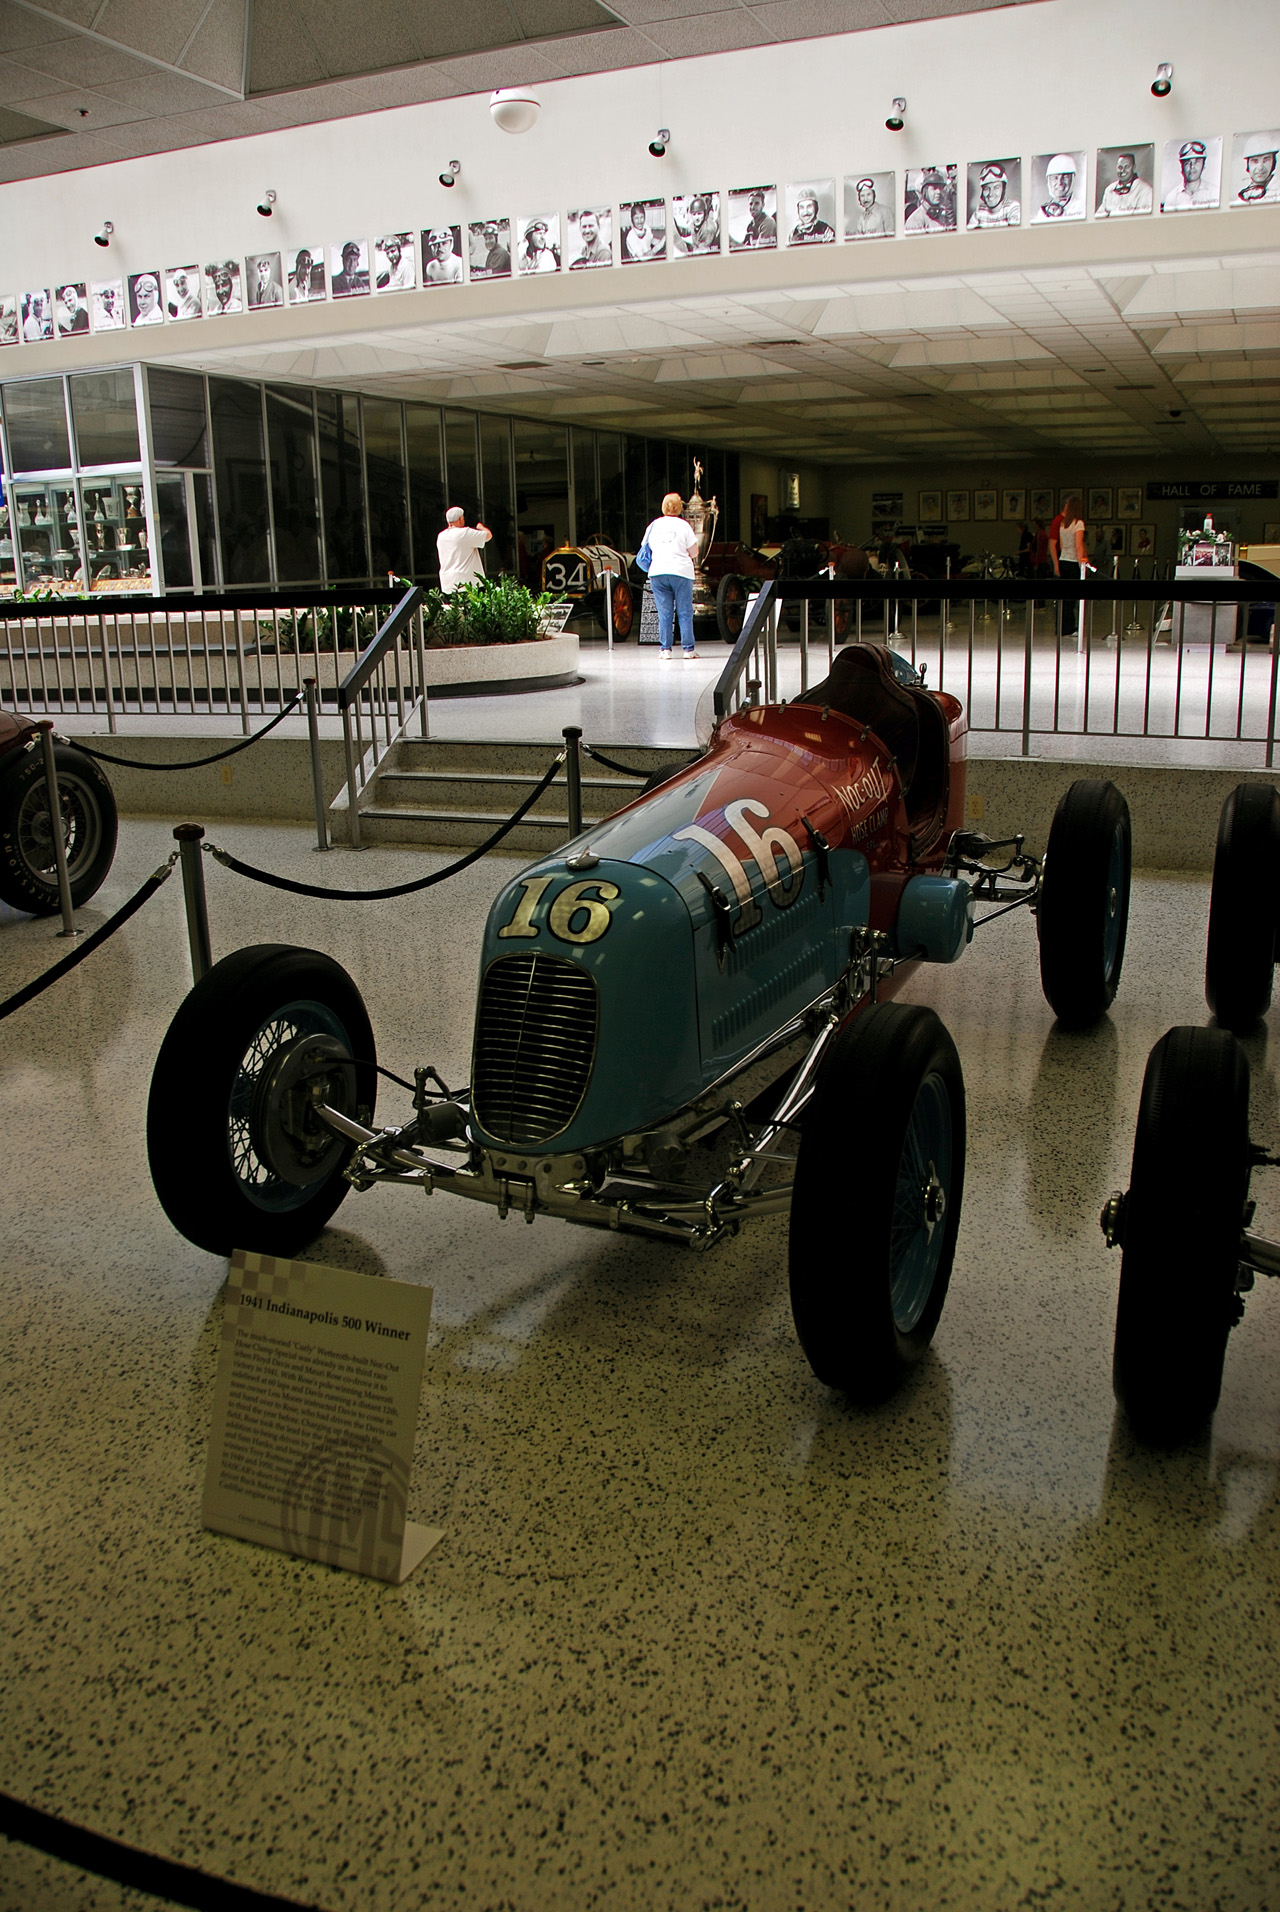 2012-04-18, 087, Indy Mtr Sp Museum